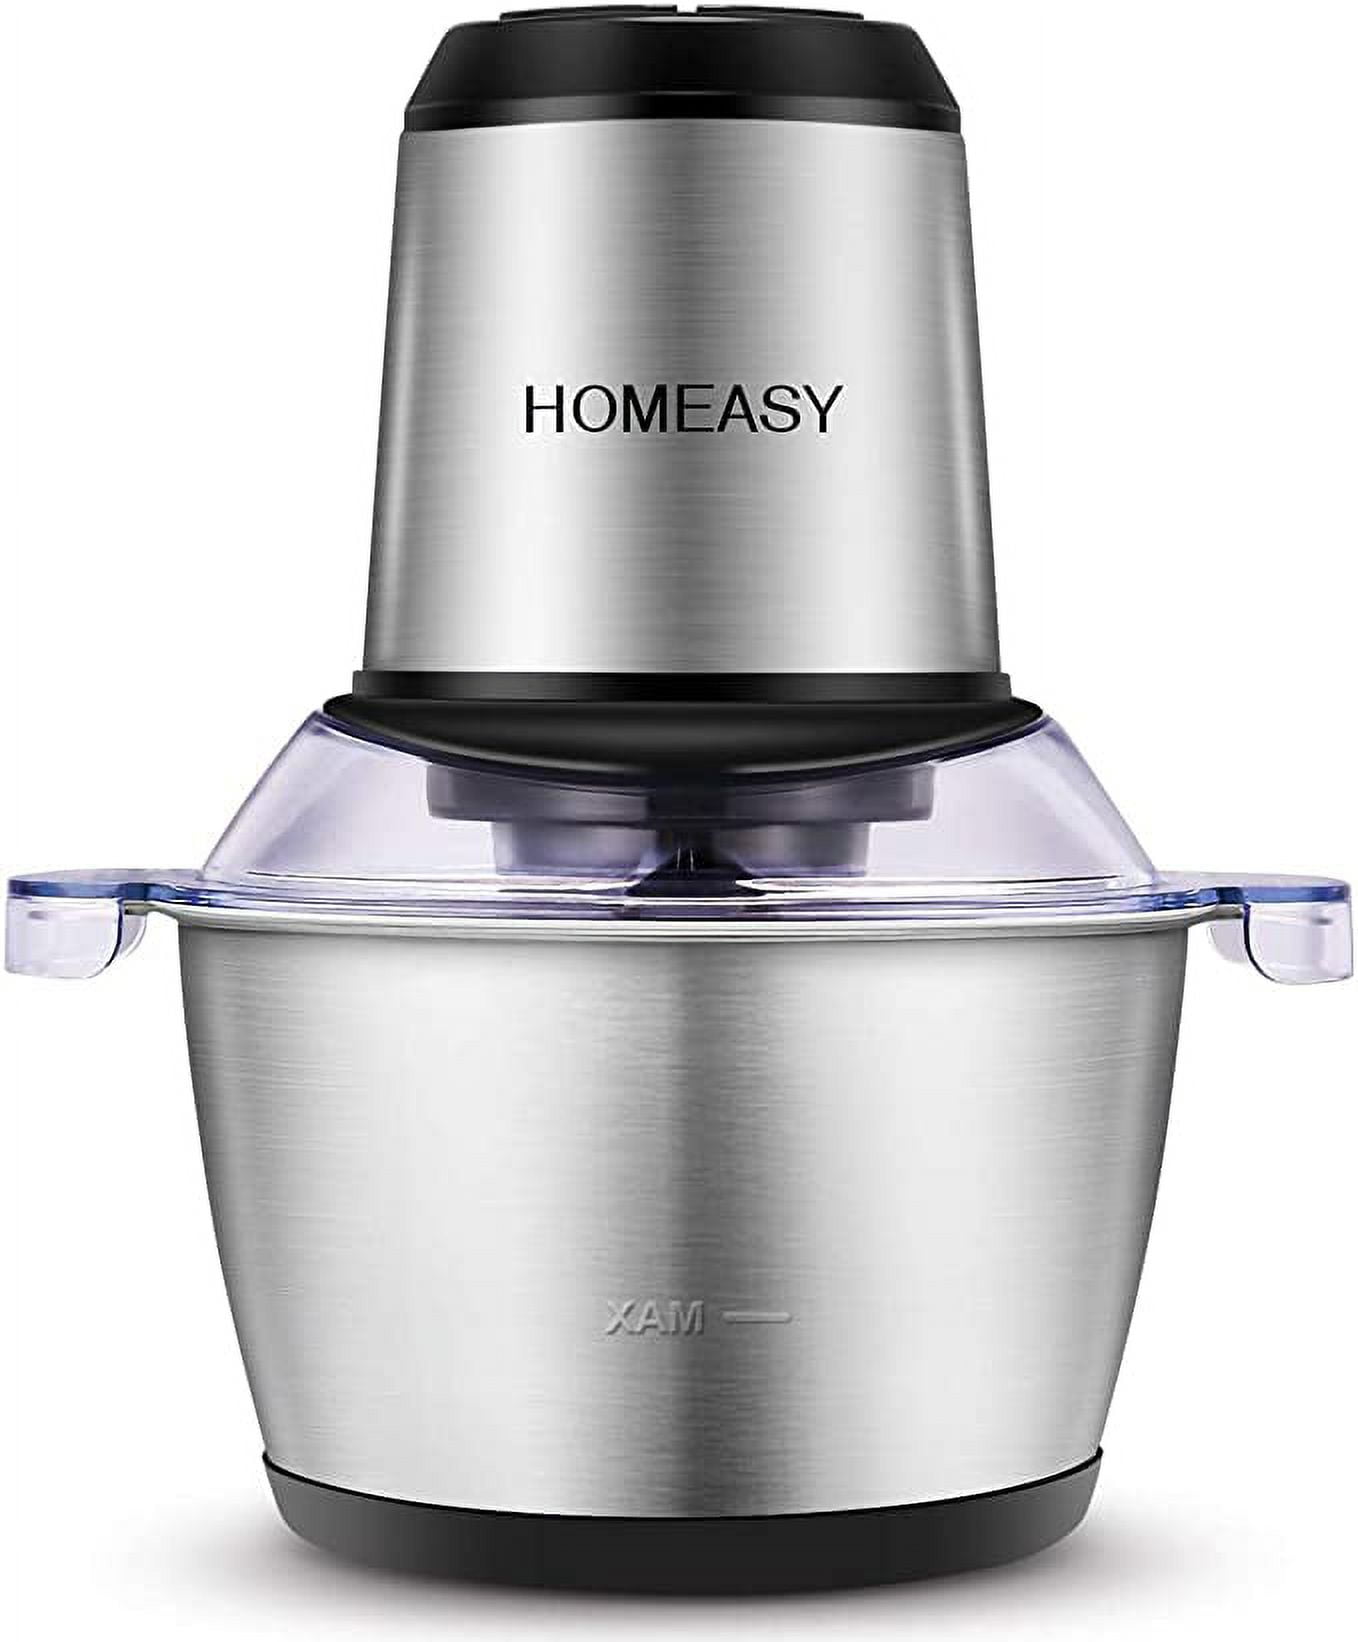  Homtone Professional Food Processors Food Chopper, 600W with 16  Cup Processor Bowl, 4 Blades, Food Chute and Pusher for Shredding, Pureeing  Vegetables, Meat, Grains, Nuts: Home & Kitchen